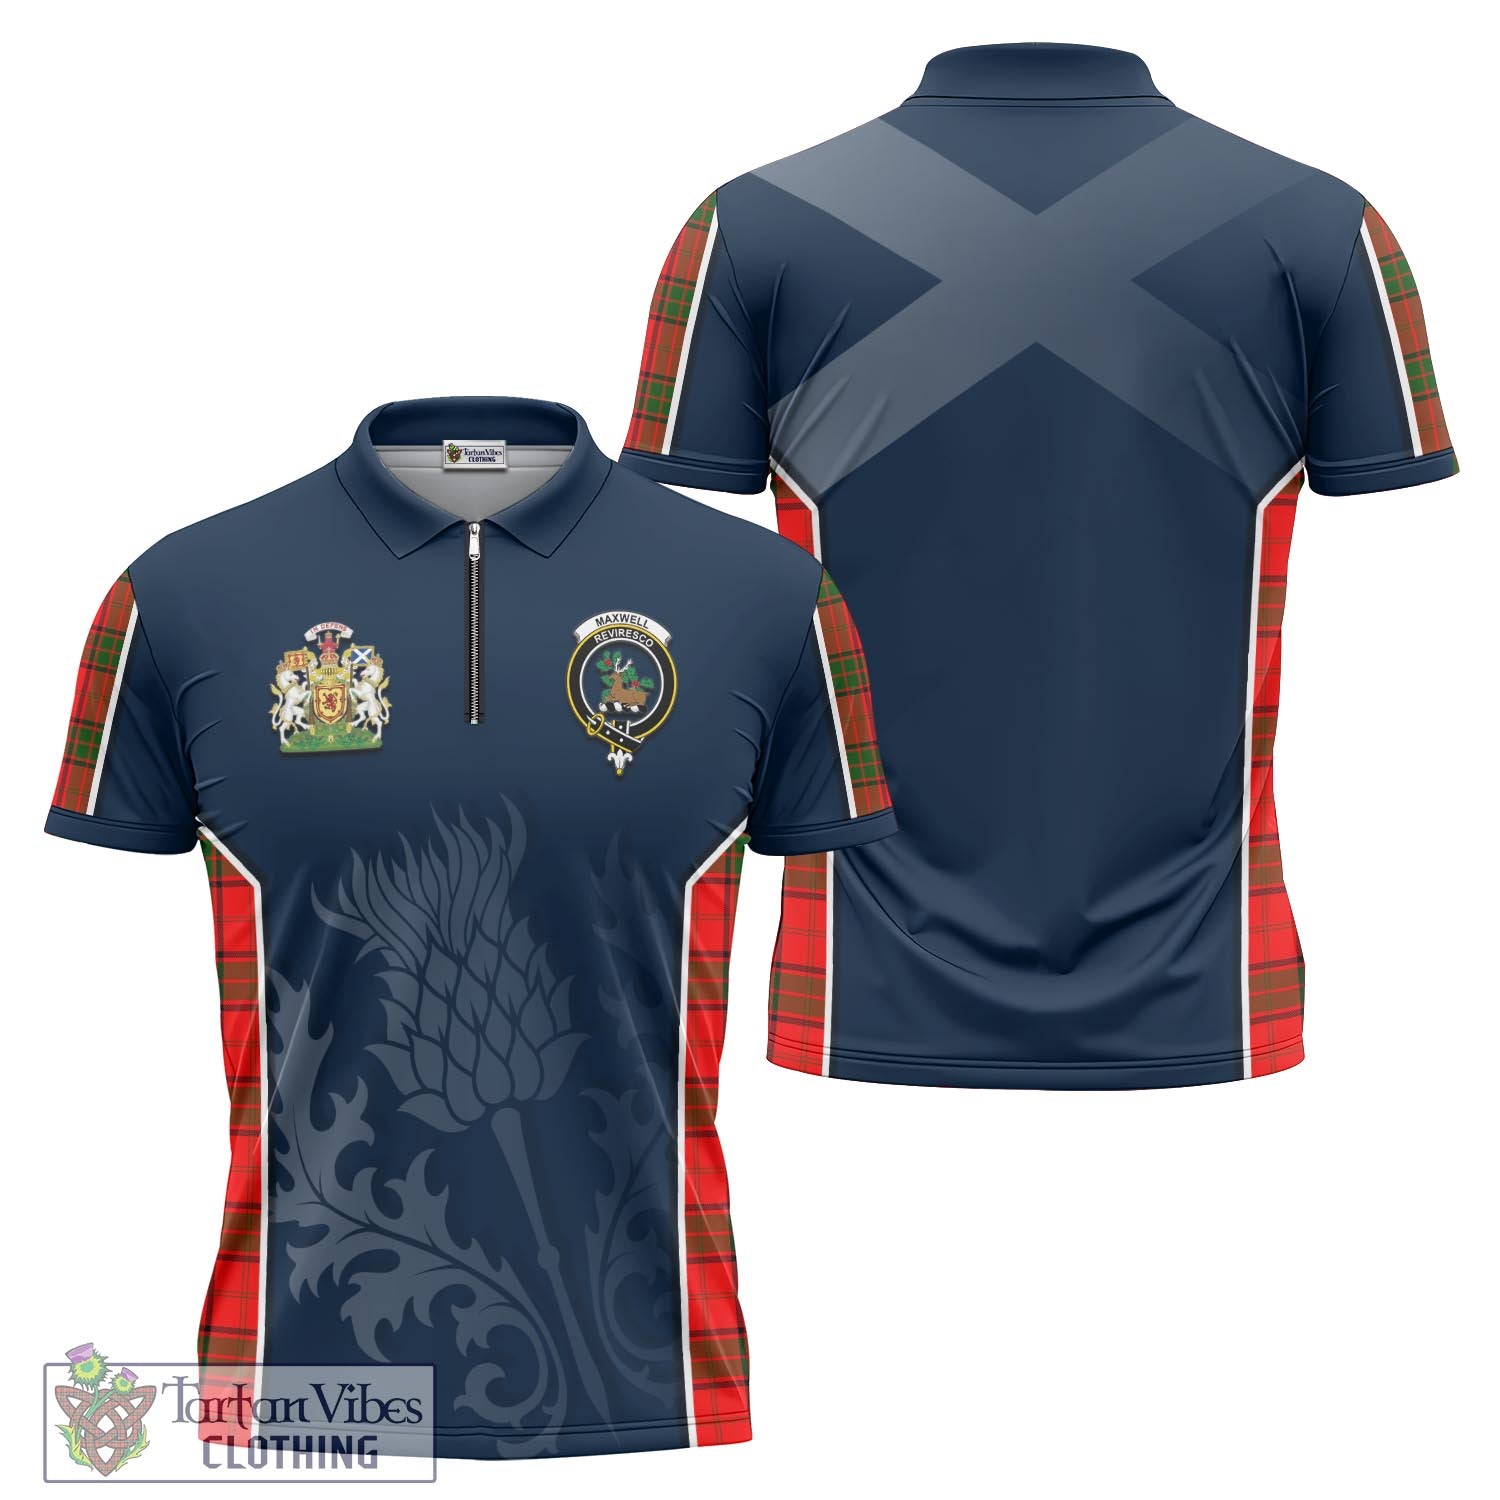 Tartan Vibes Clothing Maxwell Modern Tartan Zipper Polo Shirt with Family Crest and Scottish Thistle Vibes Sport Style